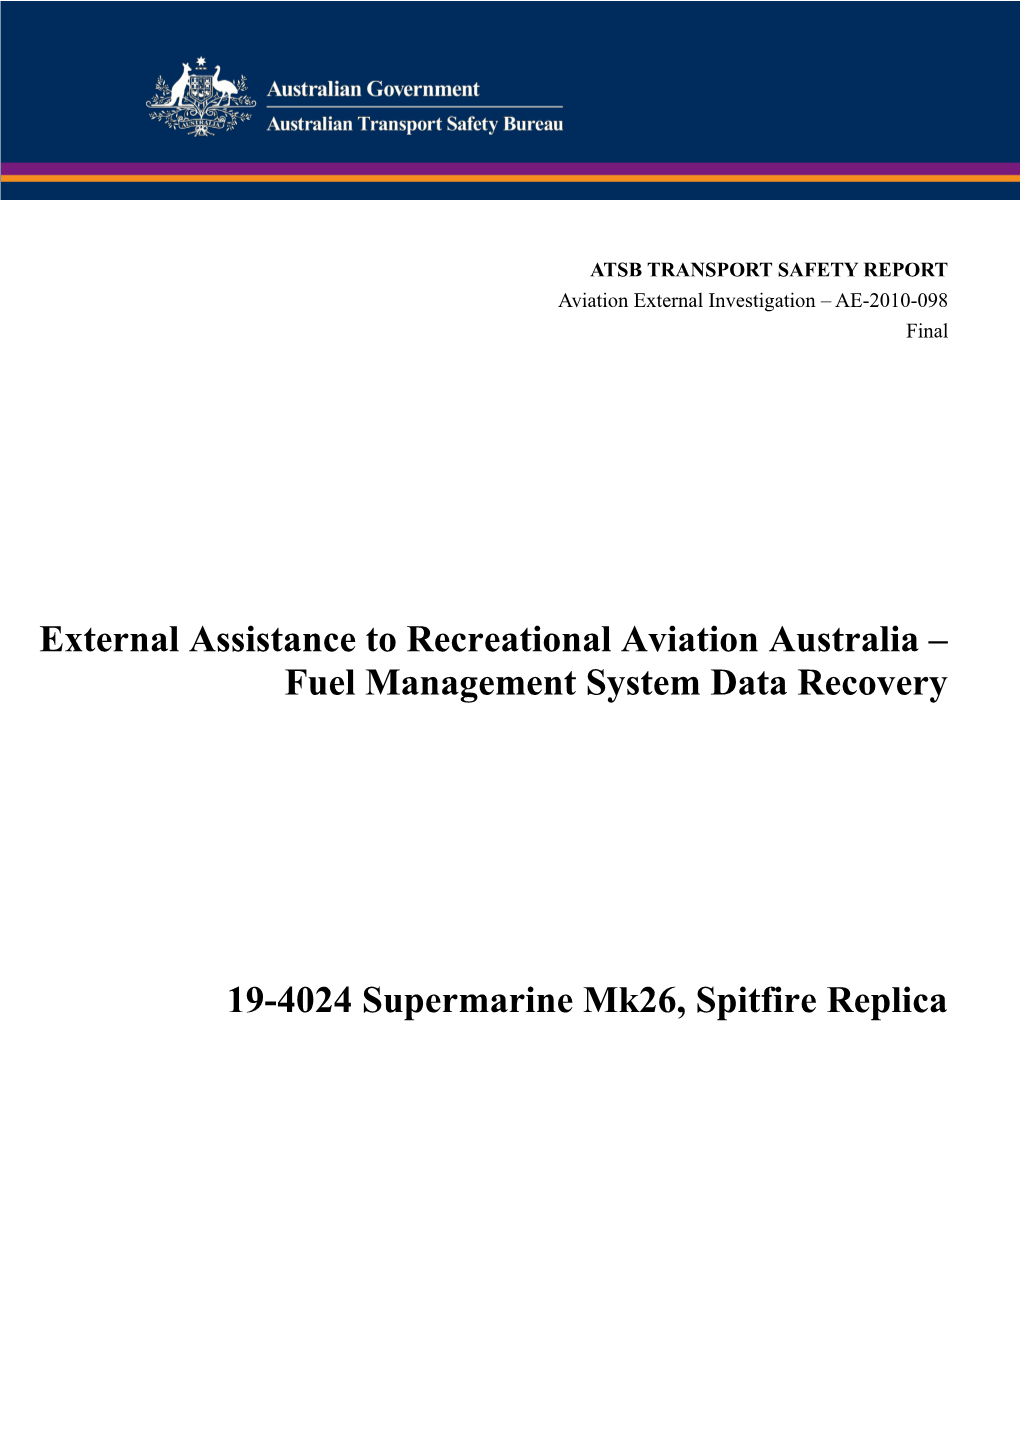 External Assistance to Recreational Aviation Australia Fuel Management System Data Recovery